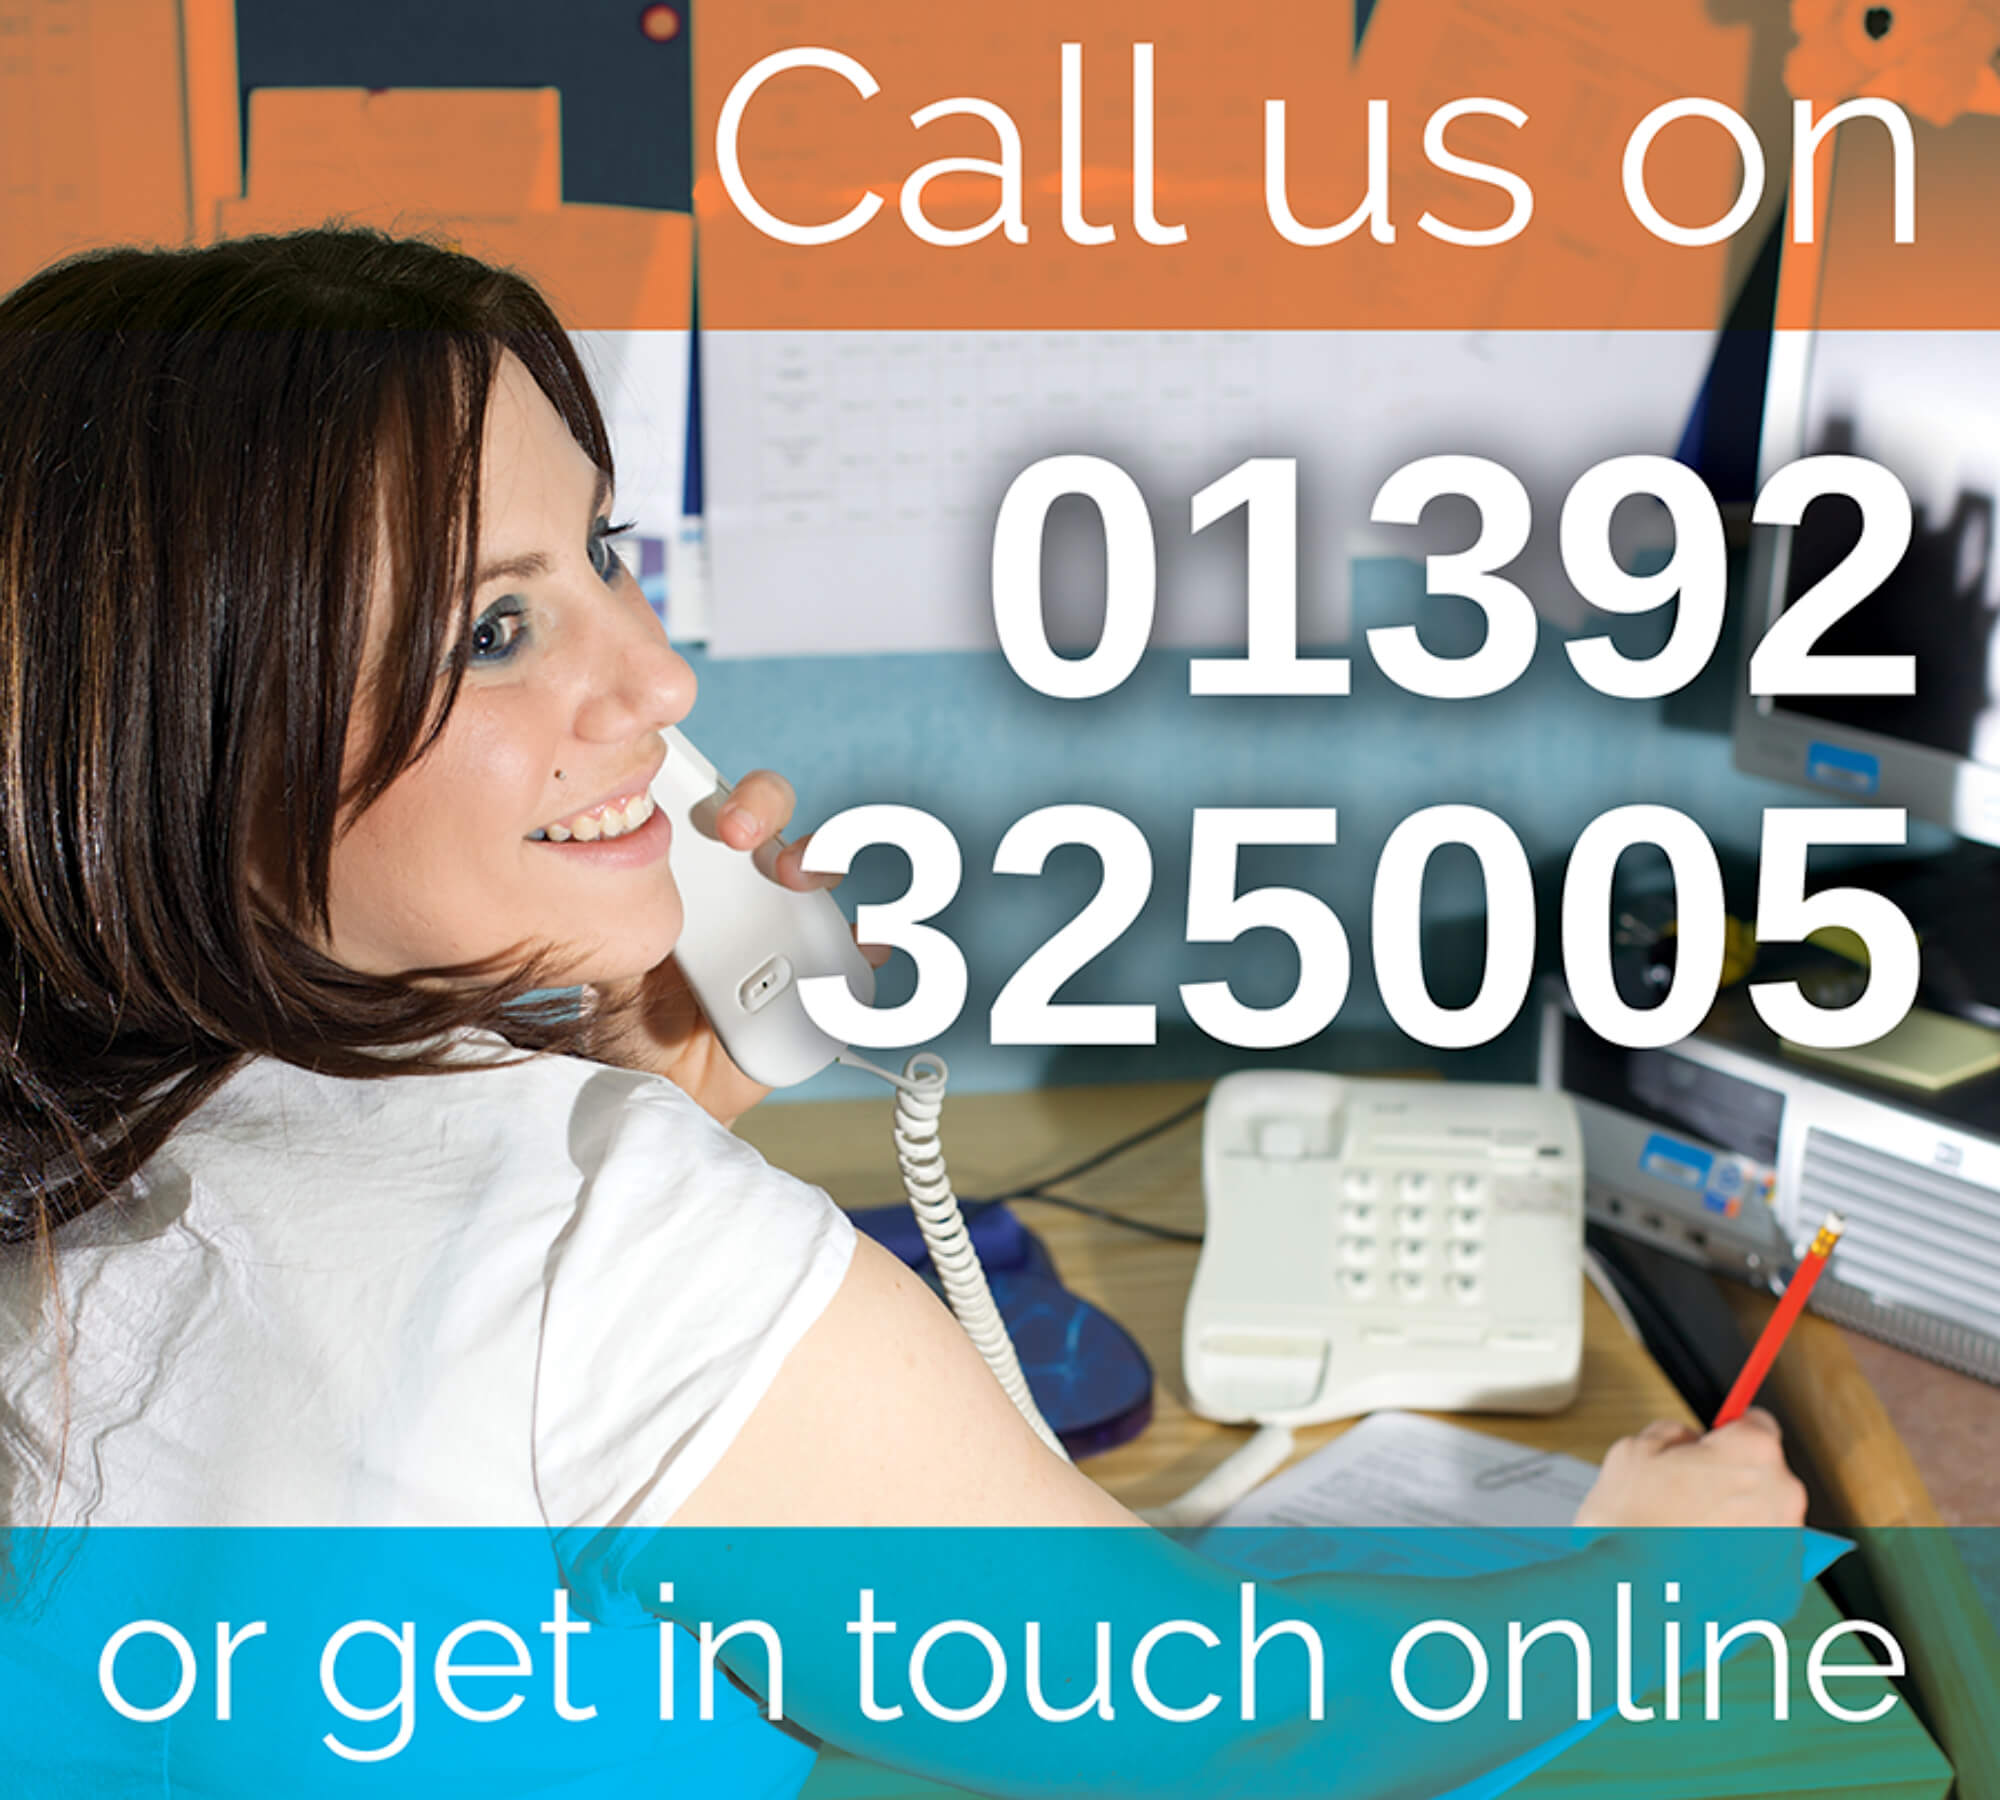 Exeter Foot & Ankle Clinic - Contact us online or call 01392 325005 to find out more